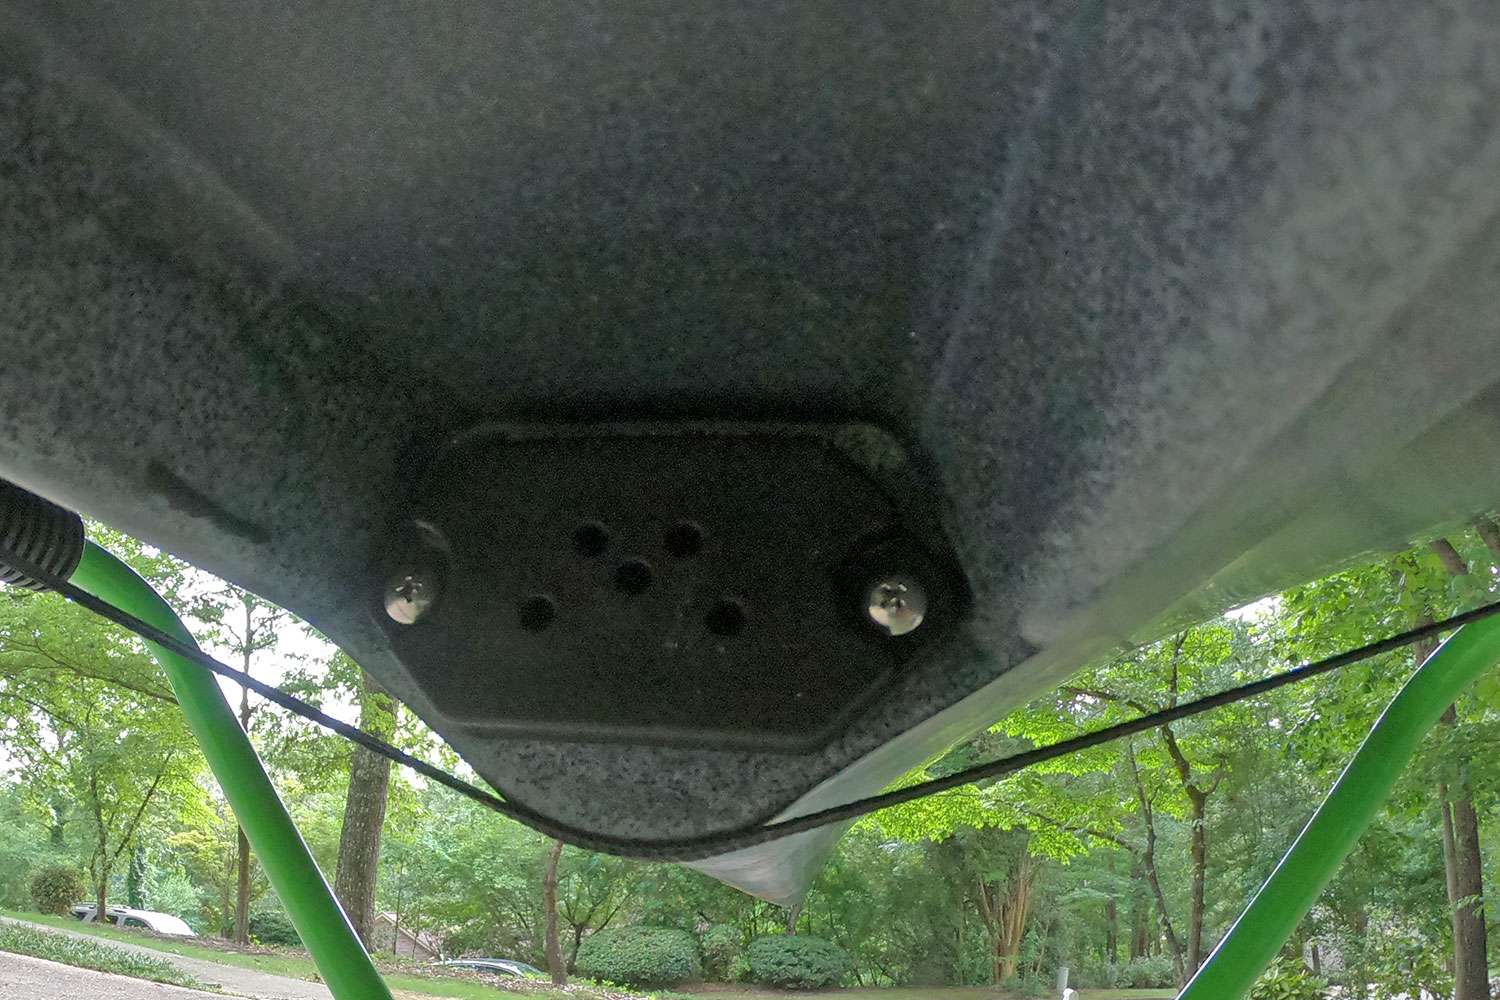 This is a universal transducer mount that is protected by the rest of the hull. Electronics are critical to boat control, mapping and understanding what's beneath, and having the right transducer will allow the angler to take full advantage of the electronics. 